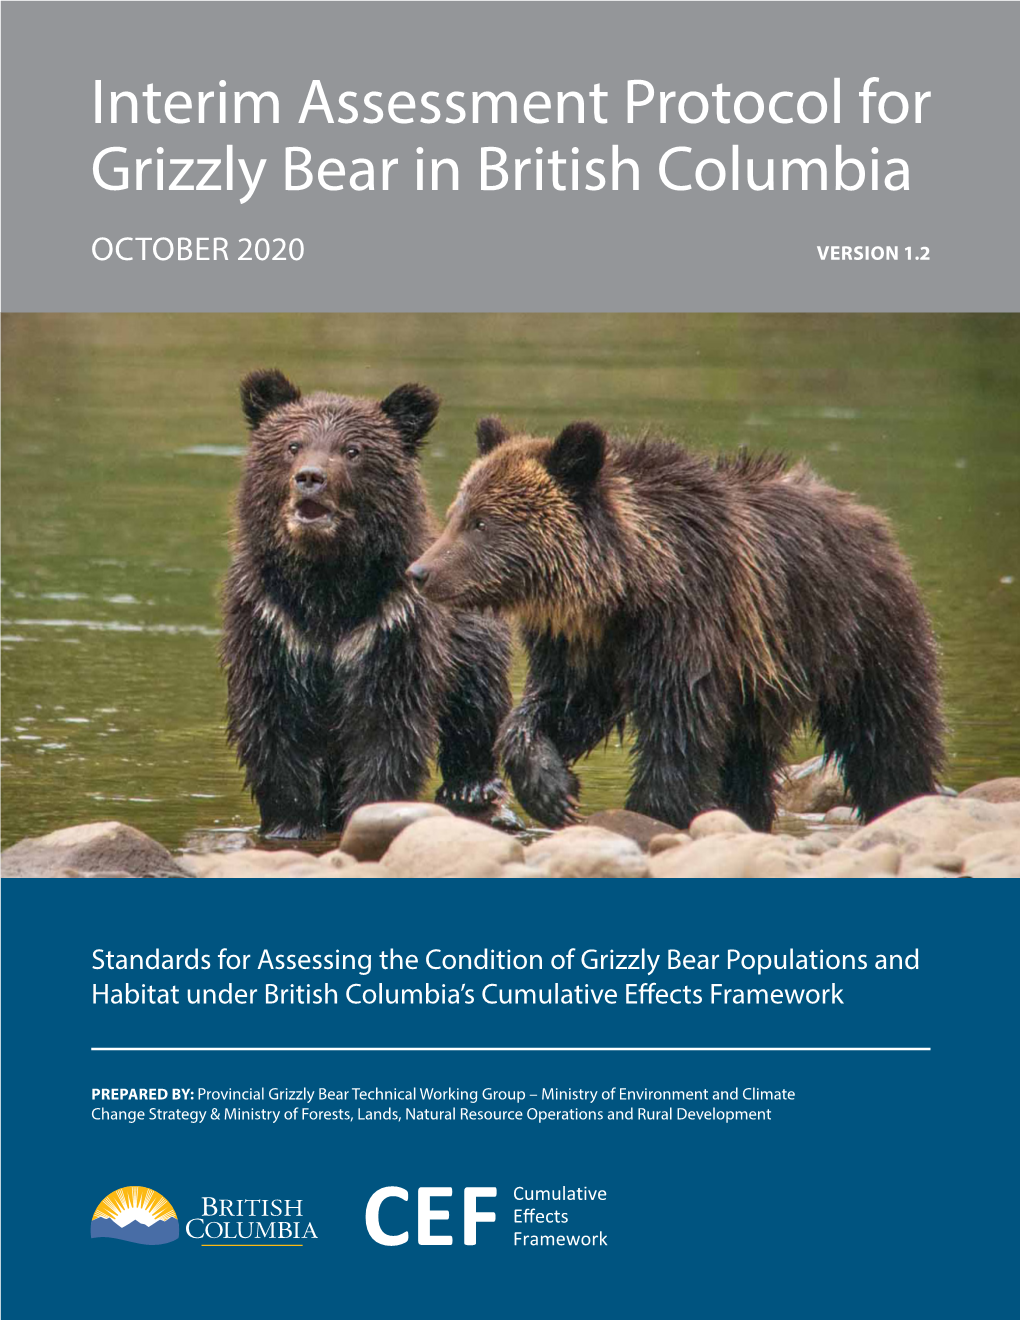 Interim Assessment Protocol for Grizzly Bear in British Columbia